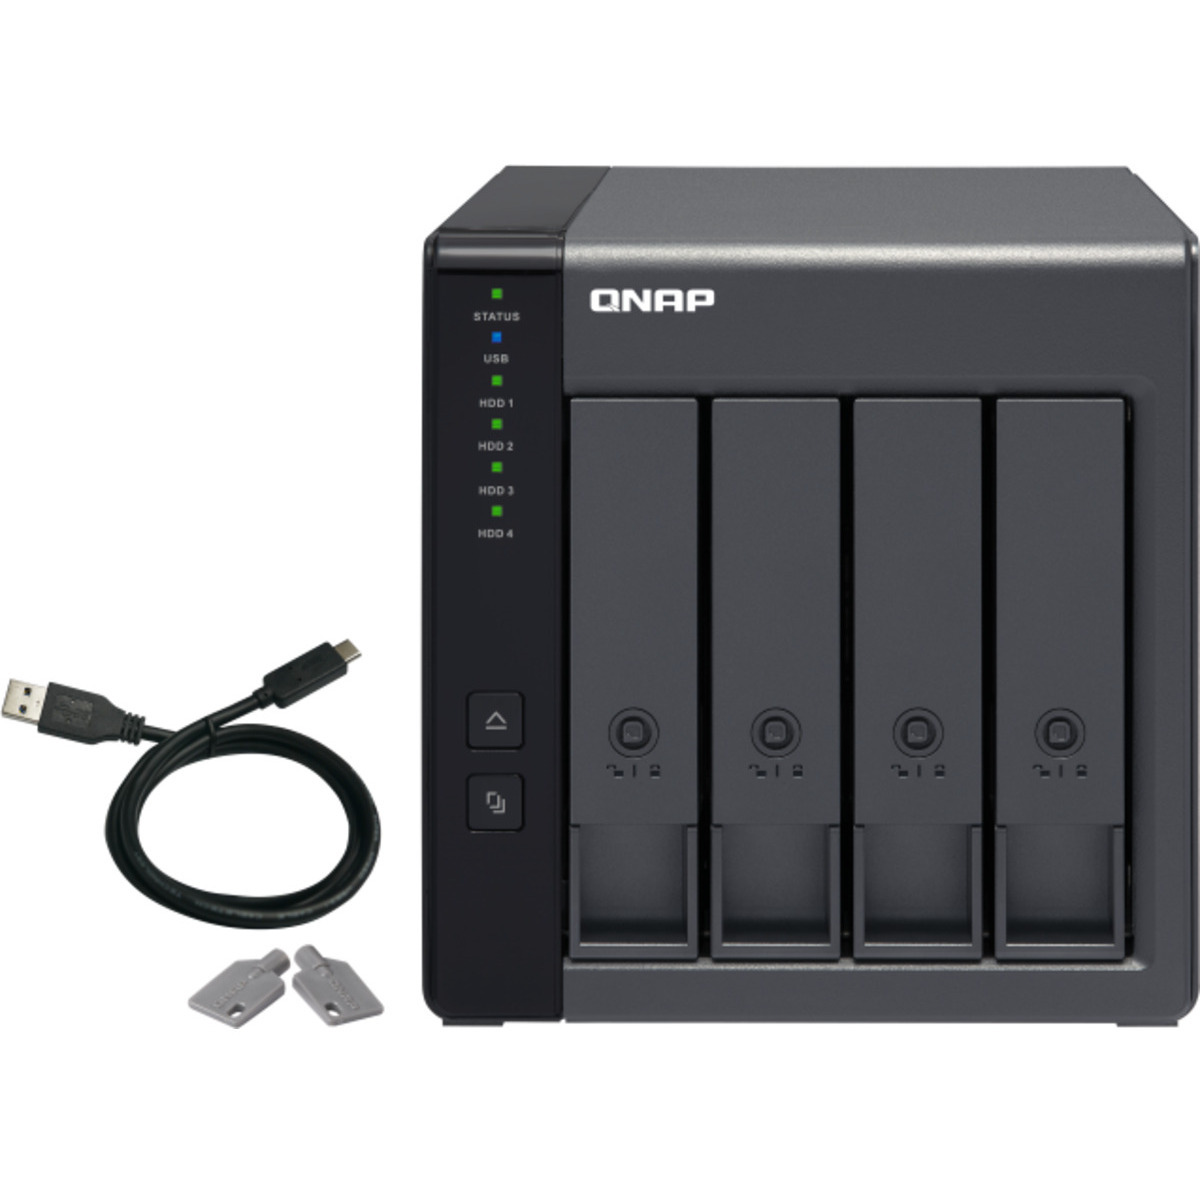 QNAP TR-004 External Expansion Drive 40tb 4-Bay Desktop Multimedia / Power User / Business Expansion Enclosure 4x10tb Seagate IronWolf ST10000VN000 3.5 7200rpm SATA 6Gb/s HDD NAS Class Drives Installed - Burn-In Tested TR-004 External Expansion Drive